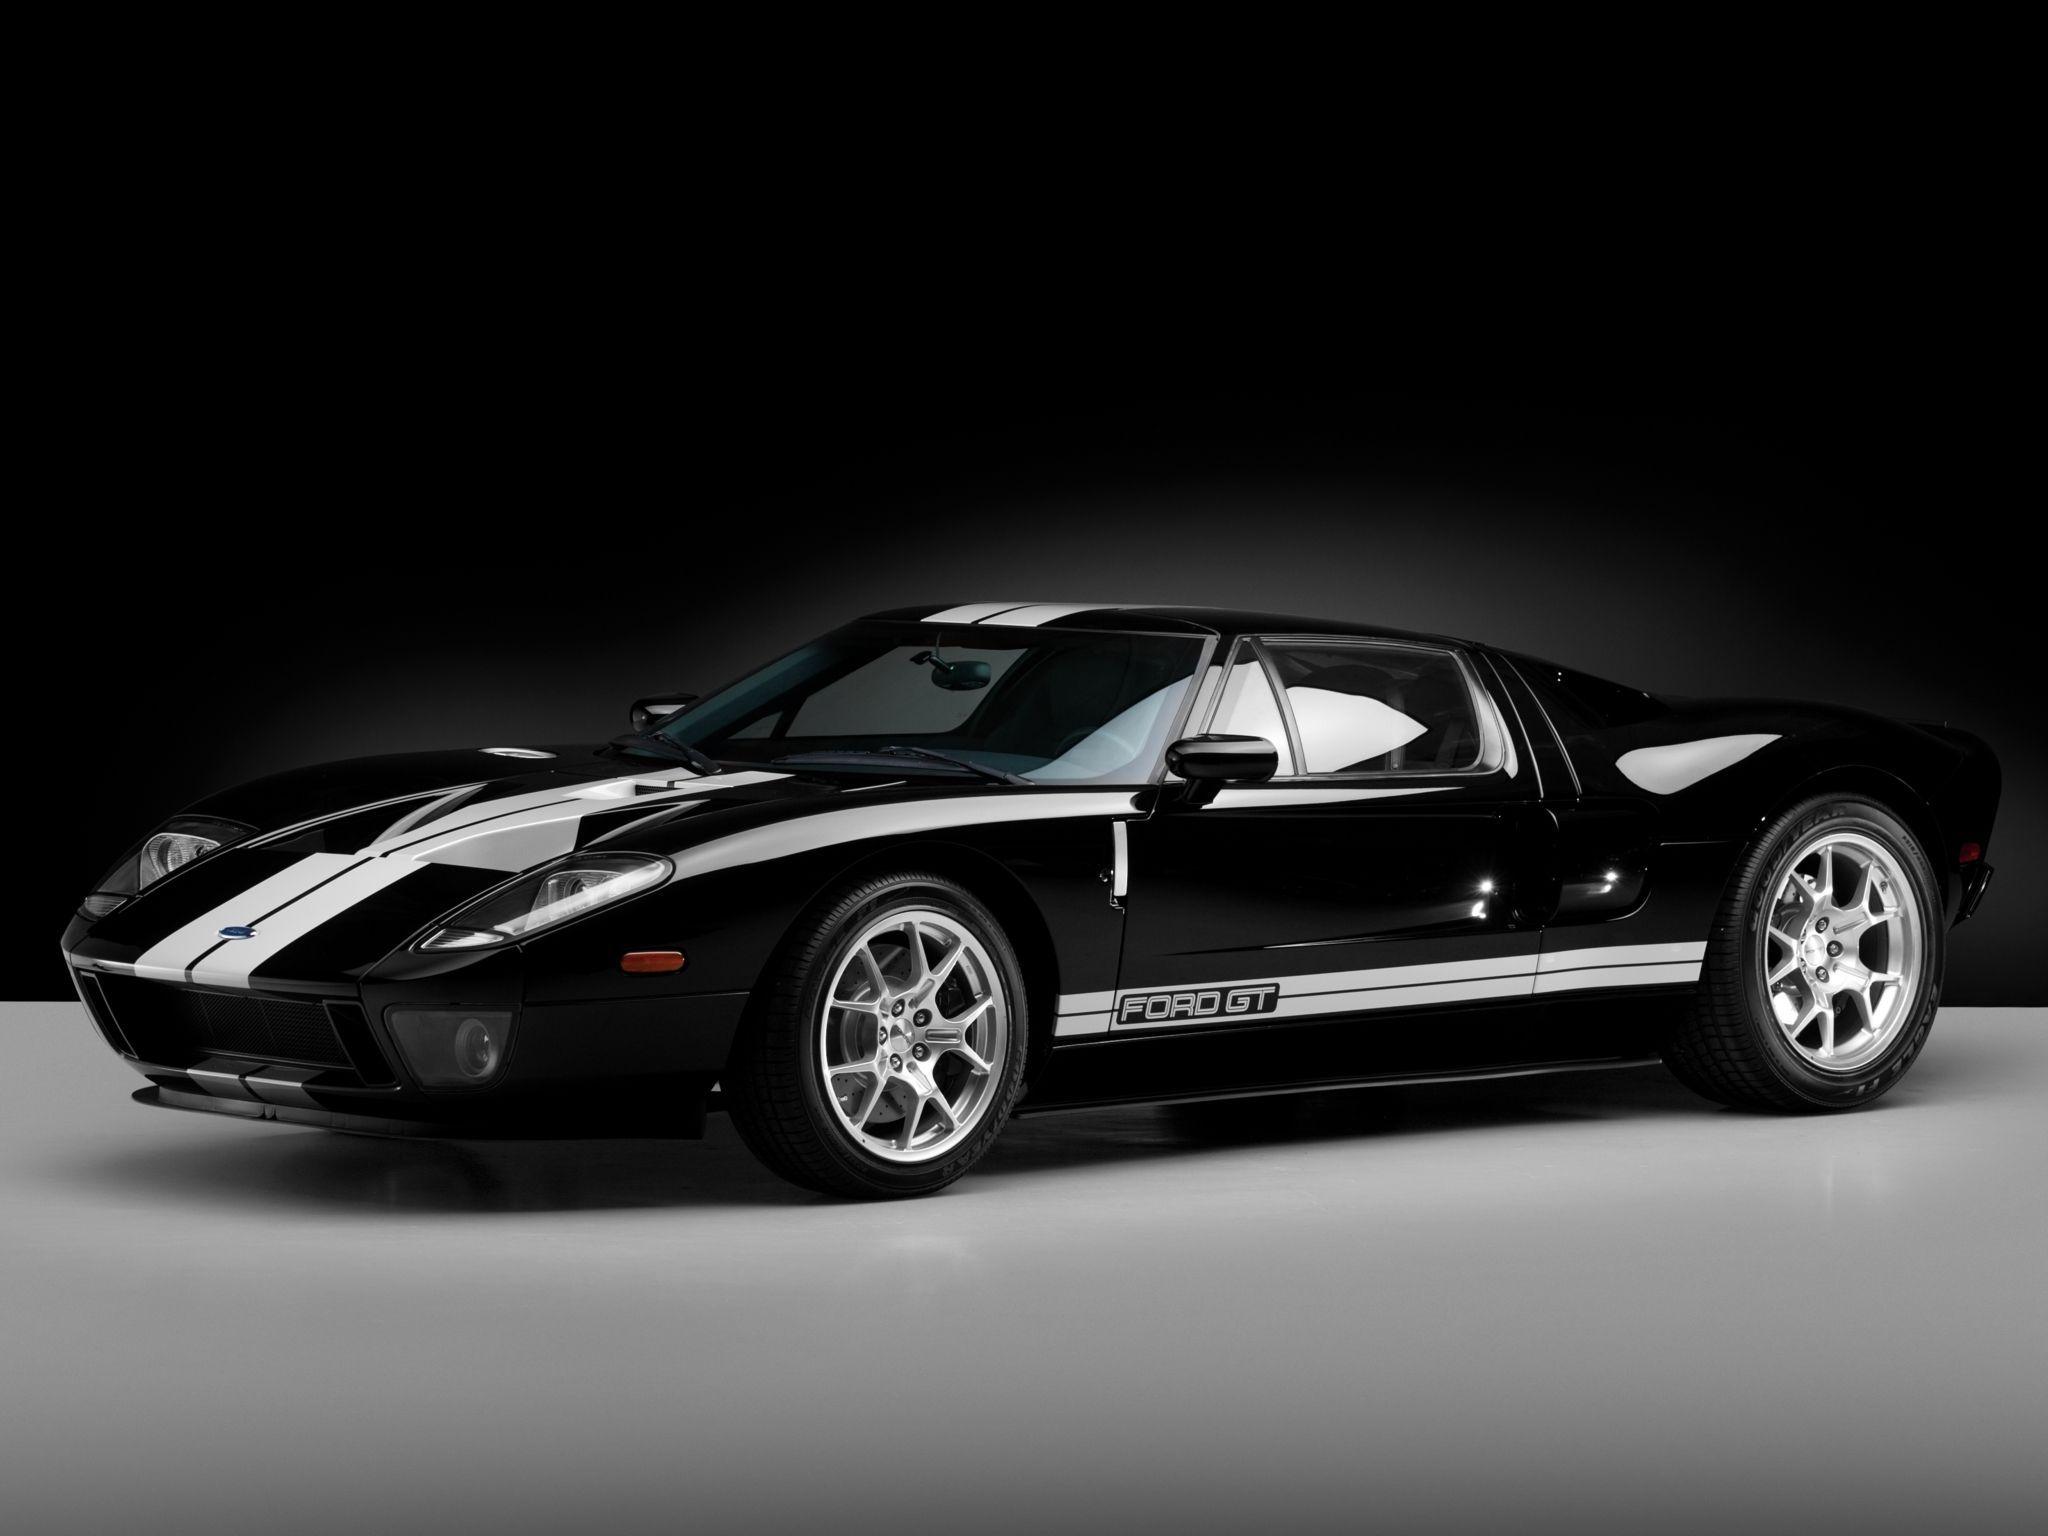 32+ 2005 Ford Gt Android Size Wallpaper HD download